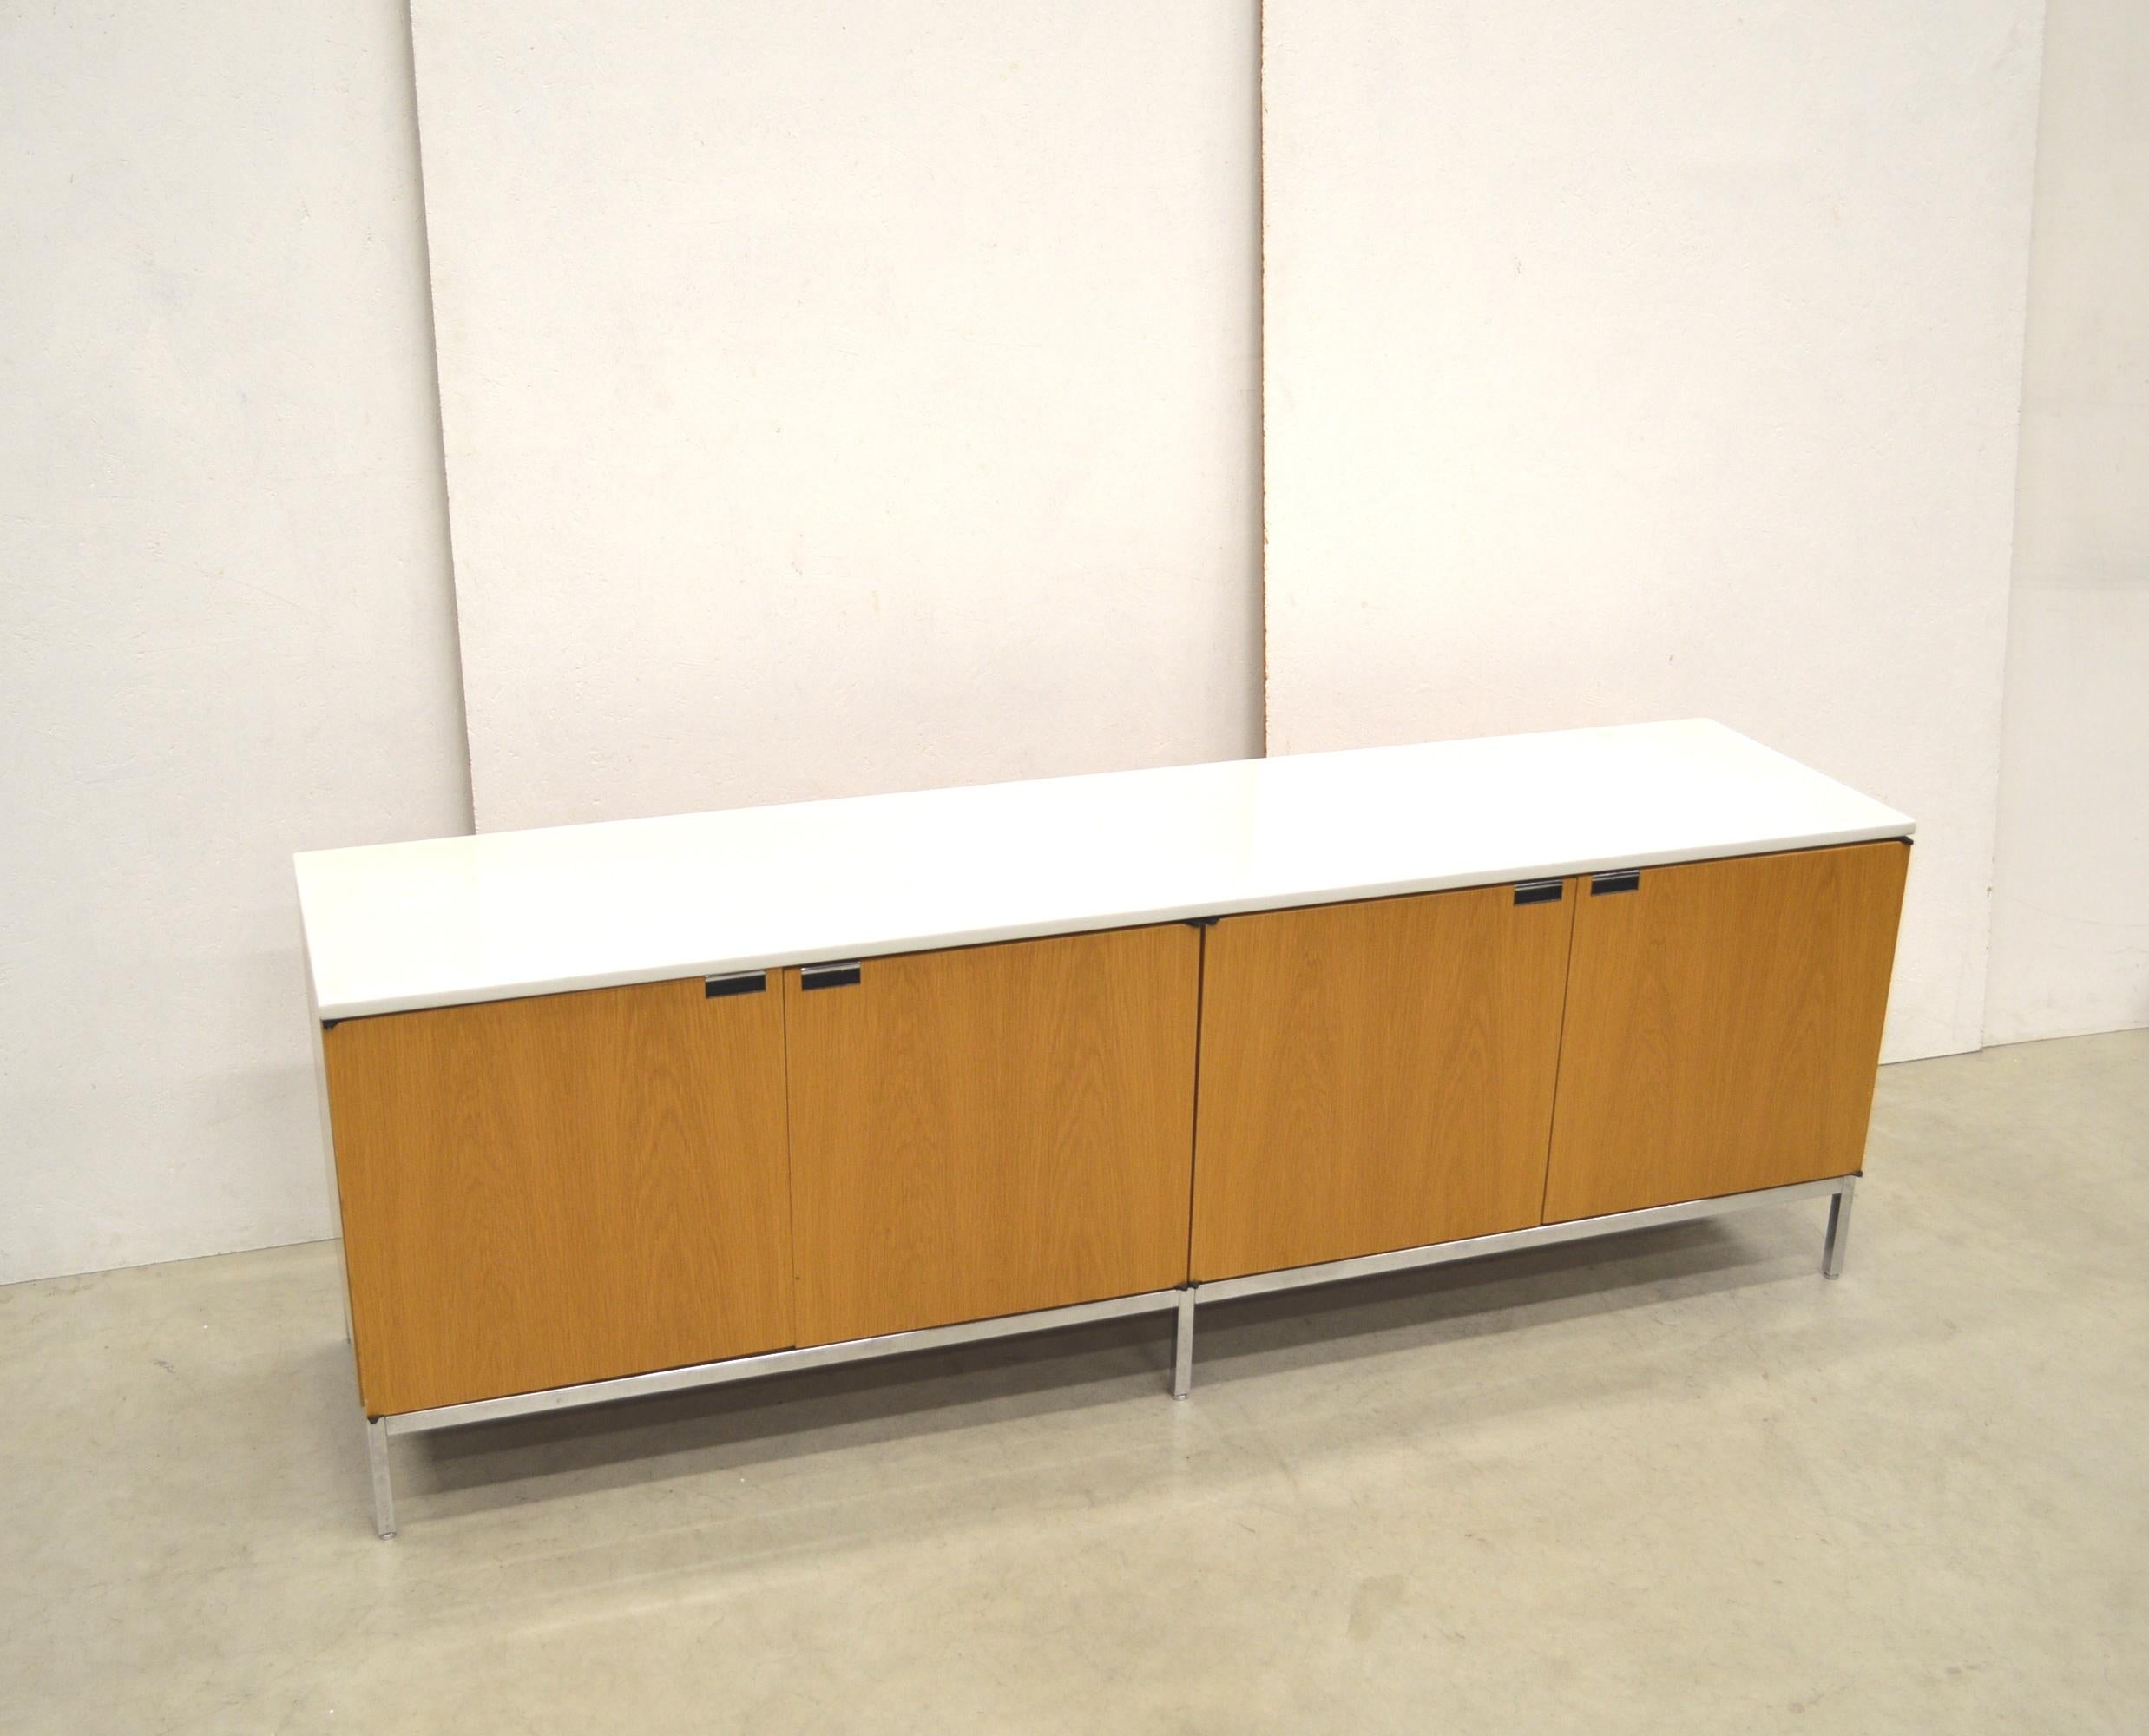 This sideboard in natural oak with marble top by Florence Knoll was produced by Knoll International in the 90s. 
It features the original signature at the feet.

The impressive piece features 4 doors on a very nice chromed steel base. It features